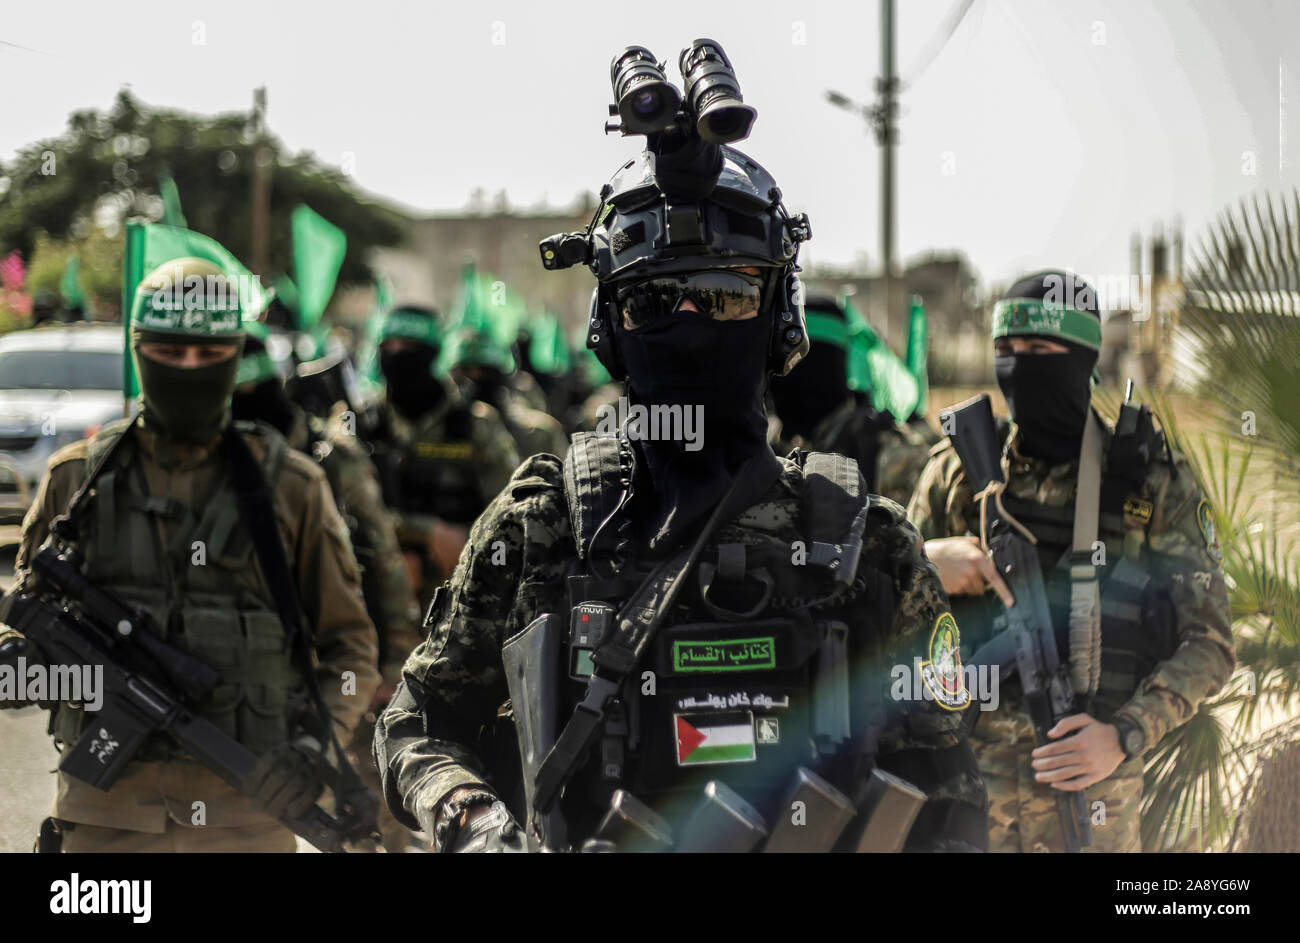 Hamas gunmen march with their weapons in Khan Younis, southern Gaza Strip.Izz el-Deen al-Qassam Brigades, the armed wing of Palestinian resistance movement Hamas, hold an anti-Israel military show in the southern Gaza Strip as part of the anniversary of the prevention of Israeli covert operation carried out in the Khan Younis on 11 November 2018. Stock Photo